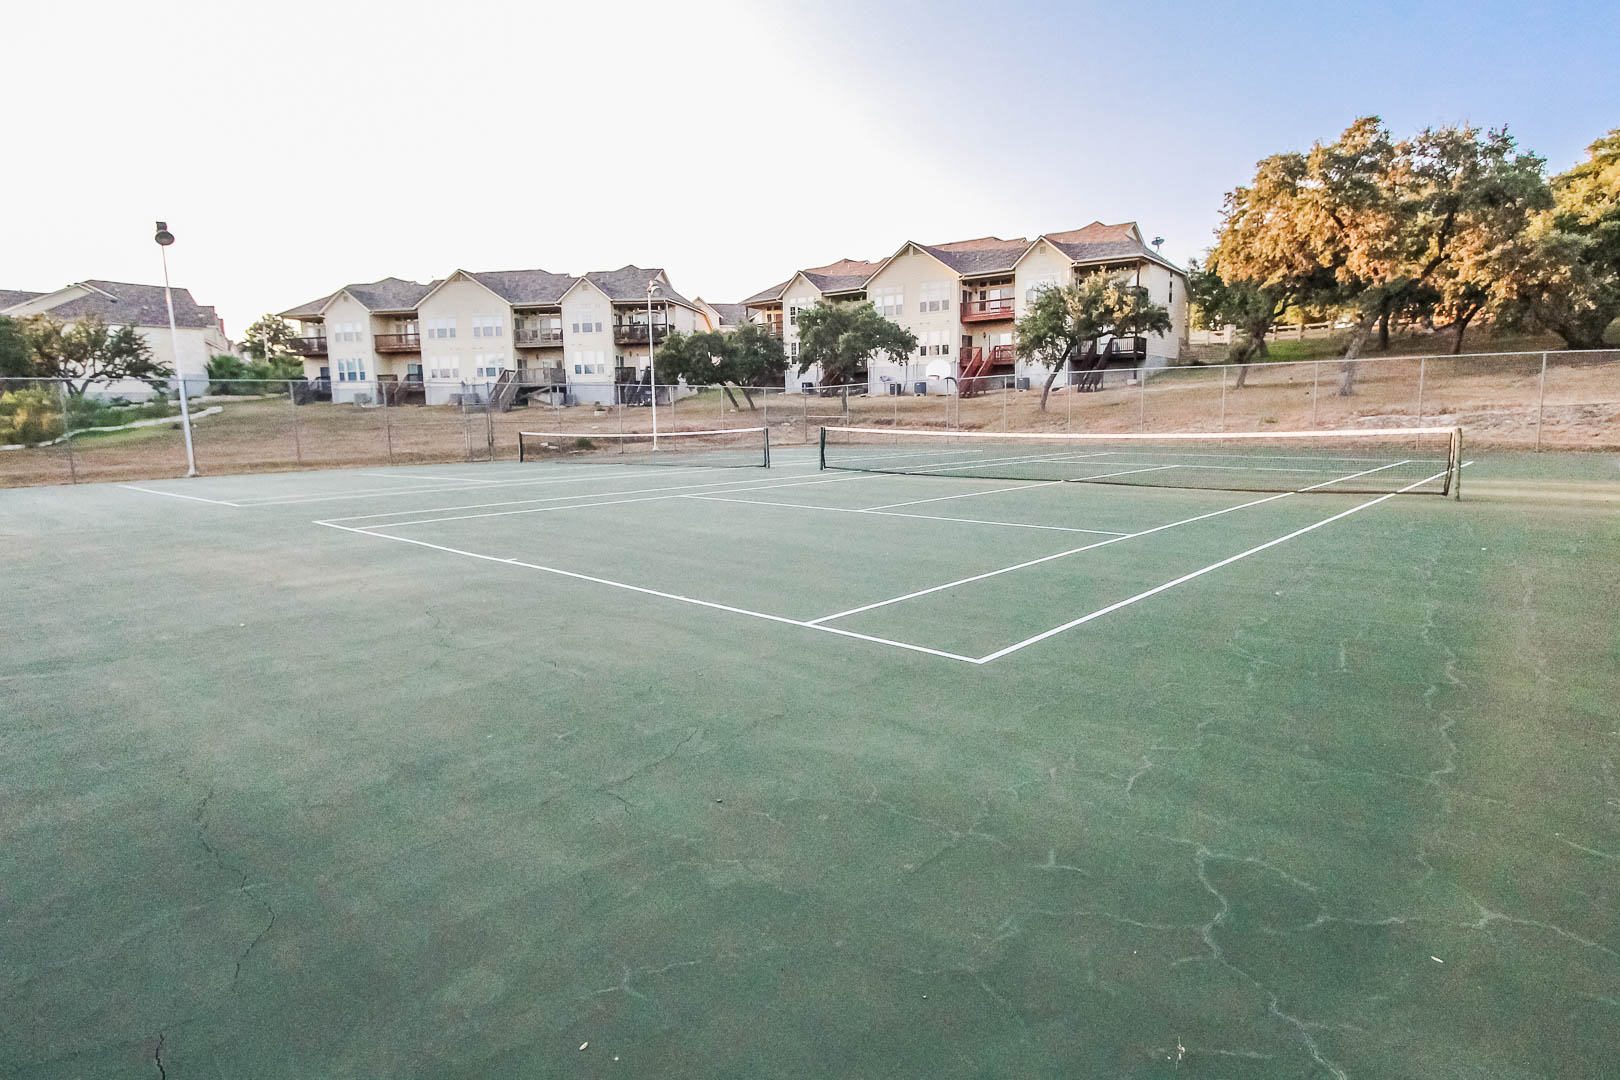 An inviting tennis court at VRI's Vacation Village at Lake Travis in Texas.